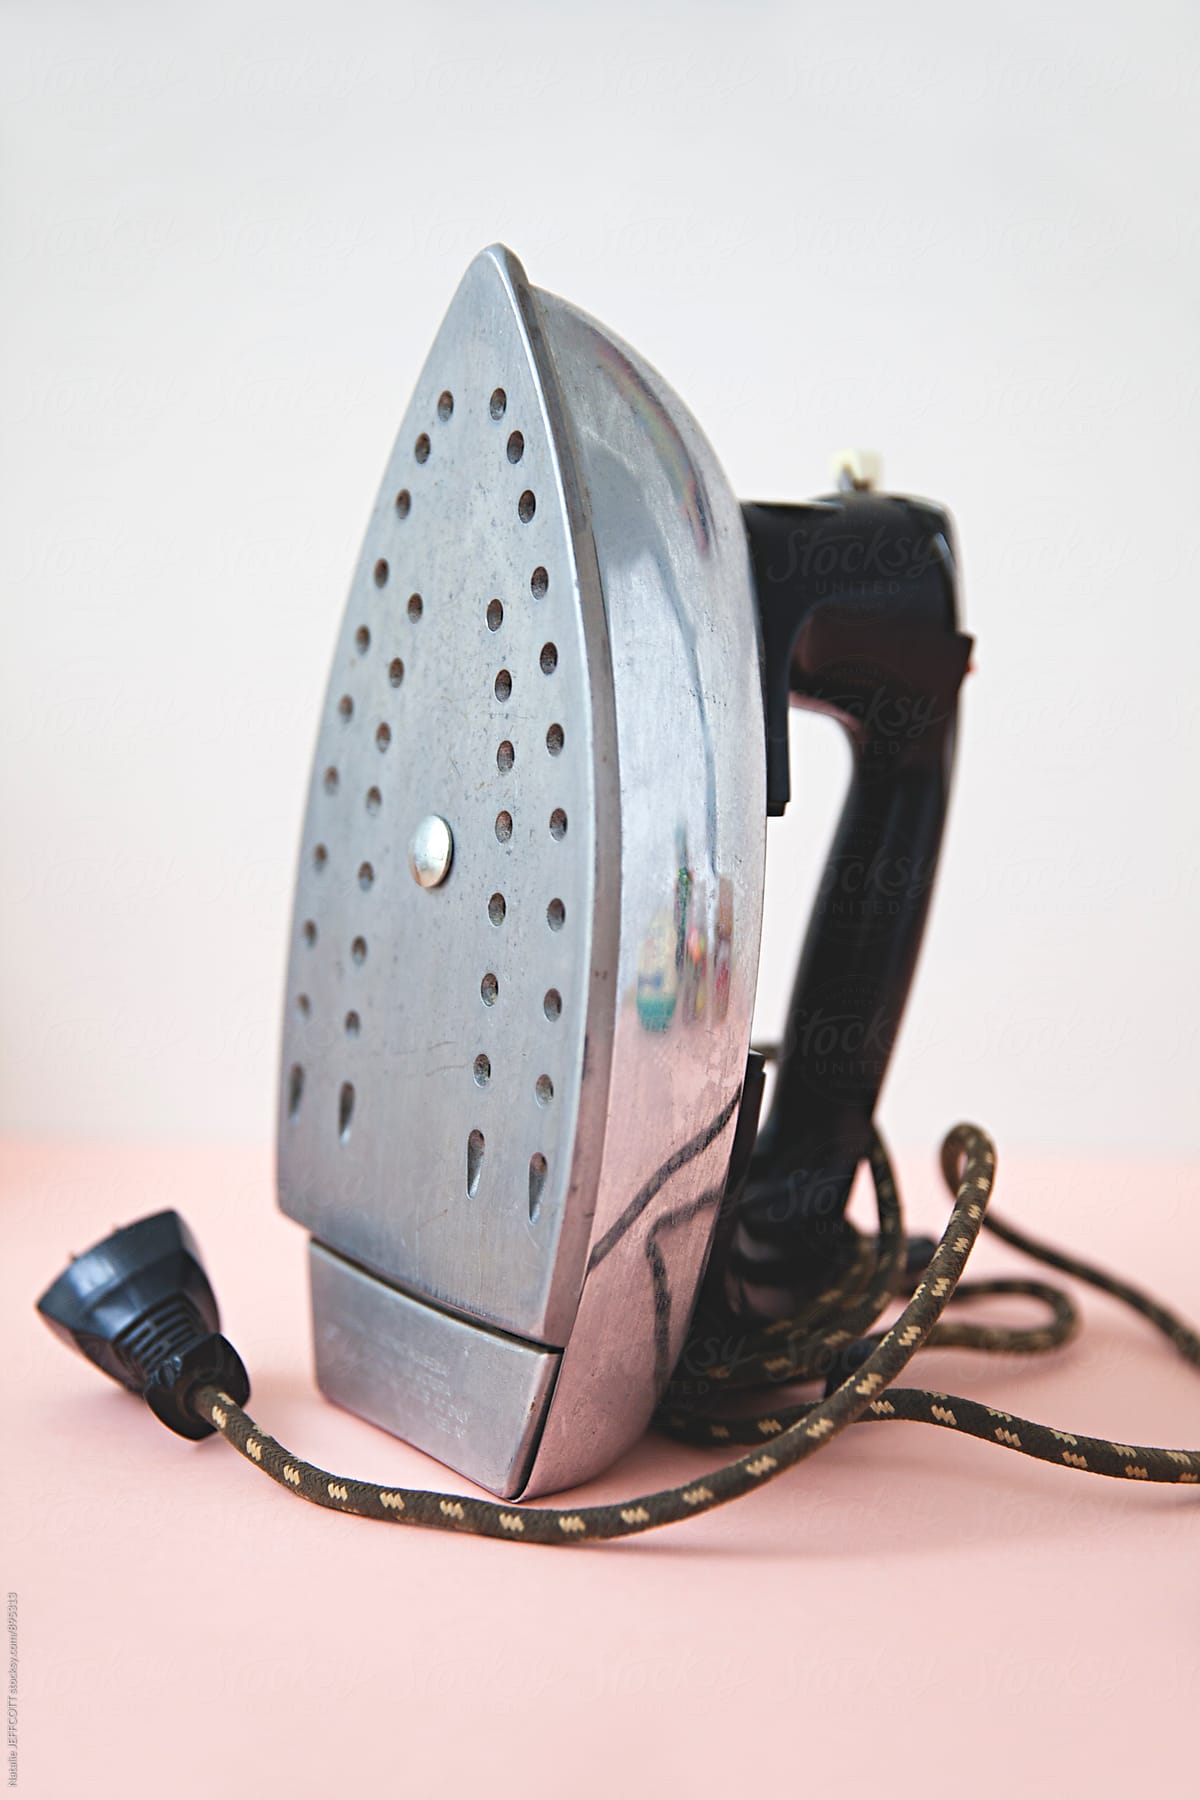 A retro household iron against a pink and white background